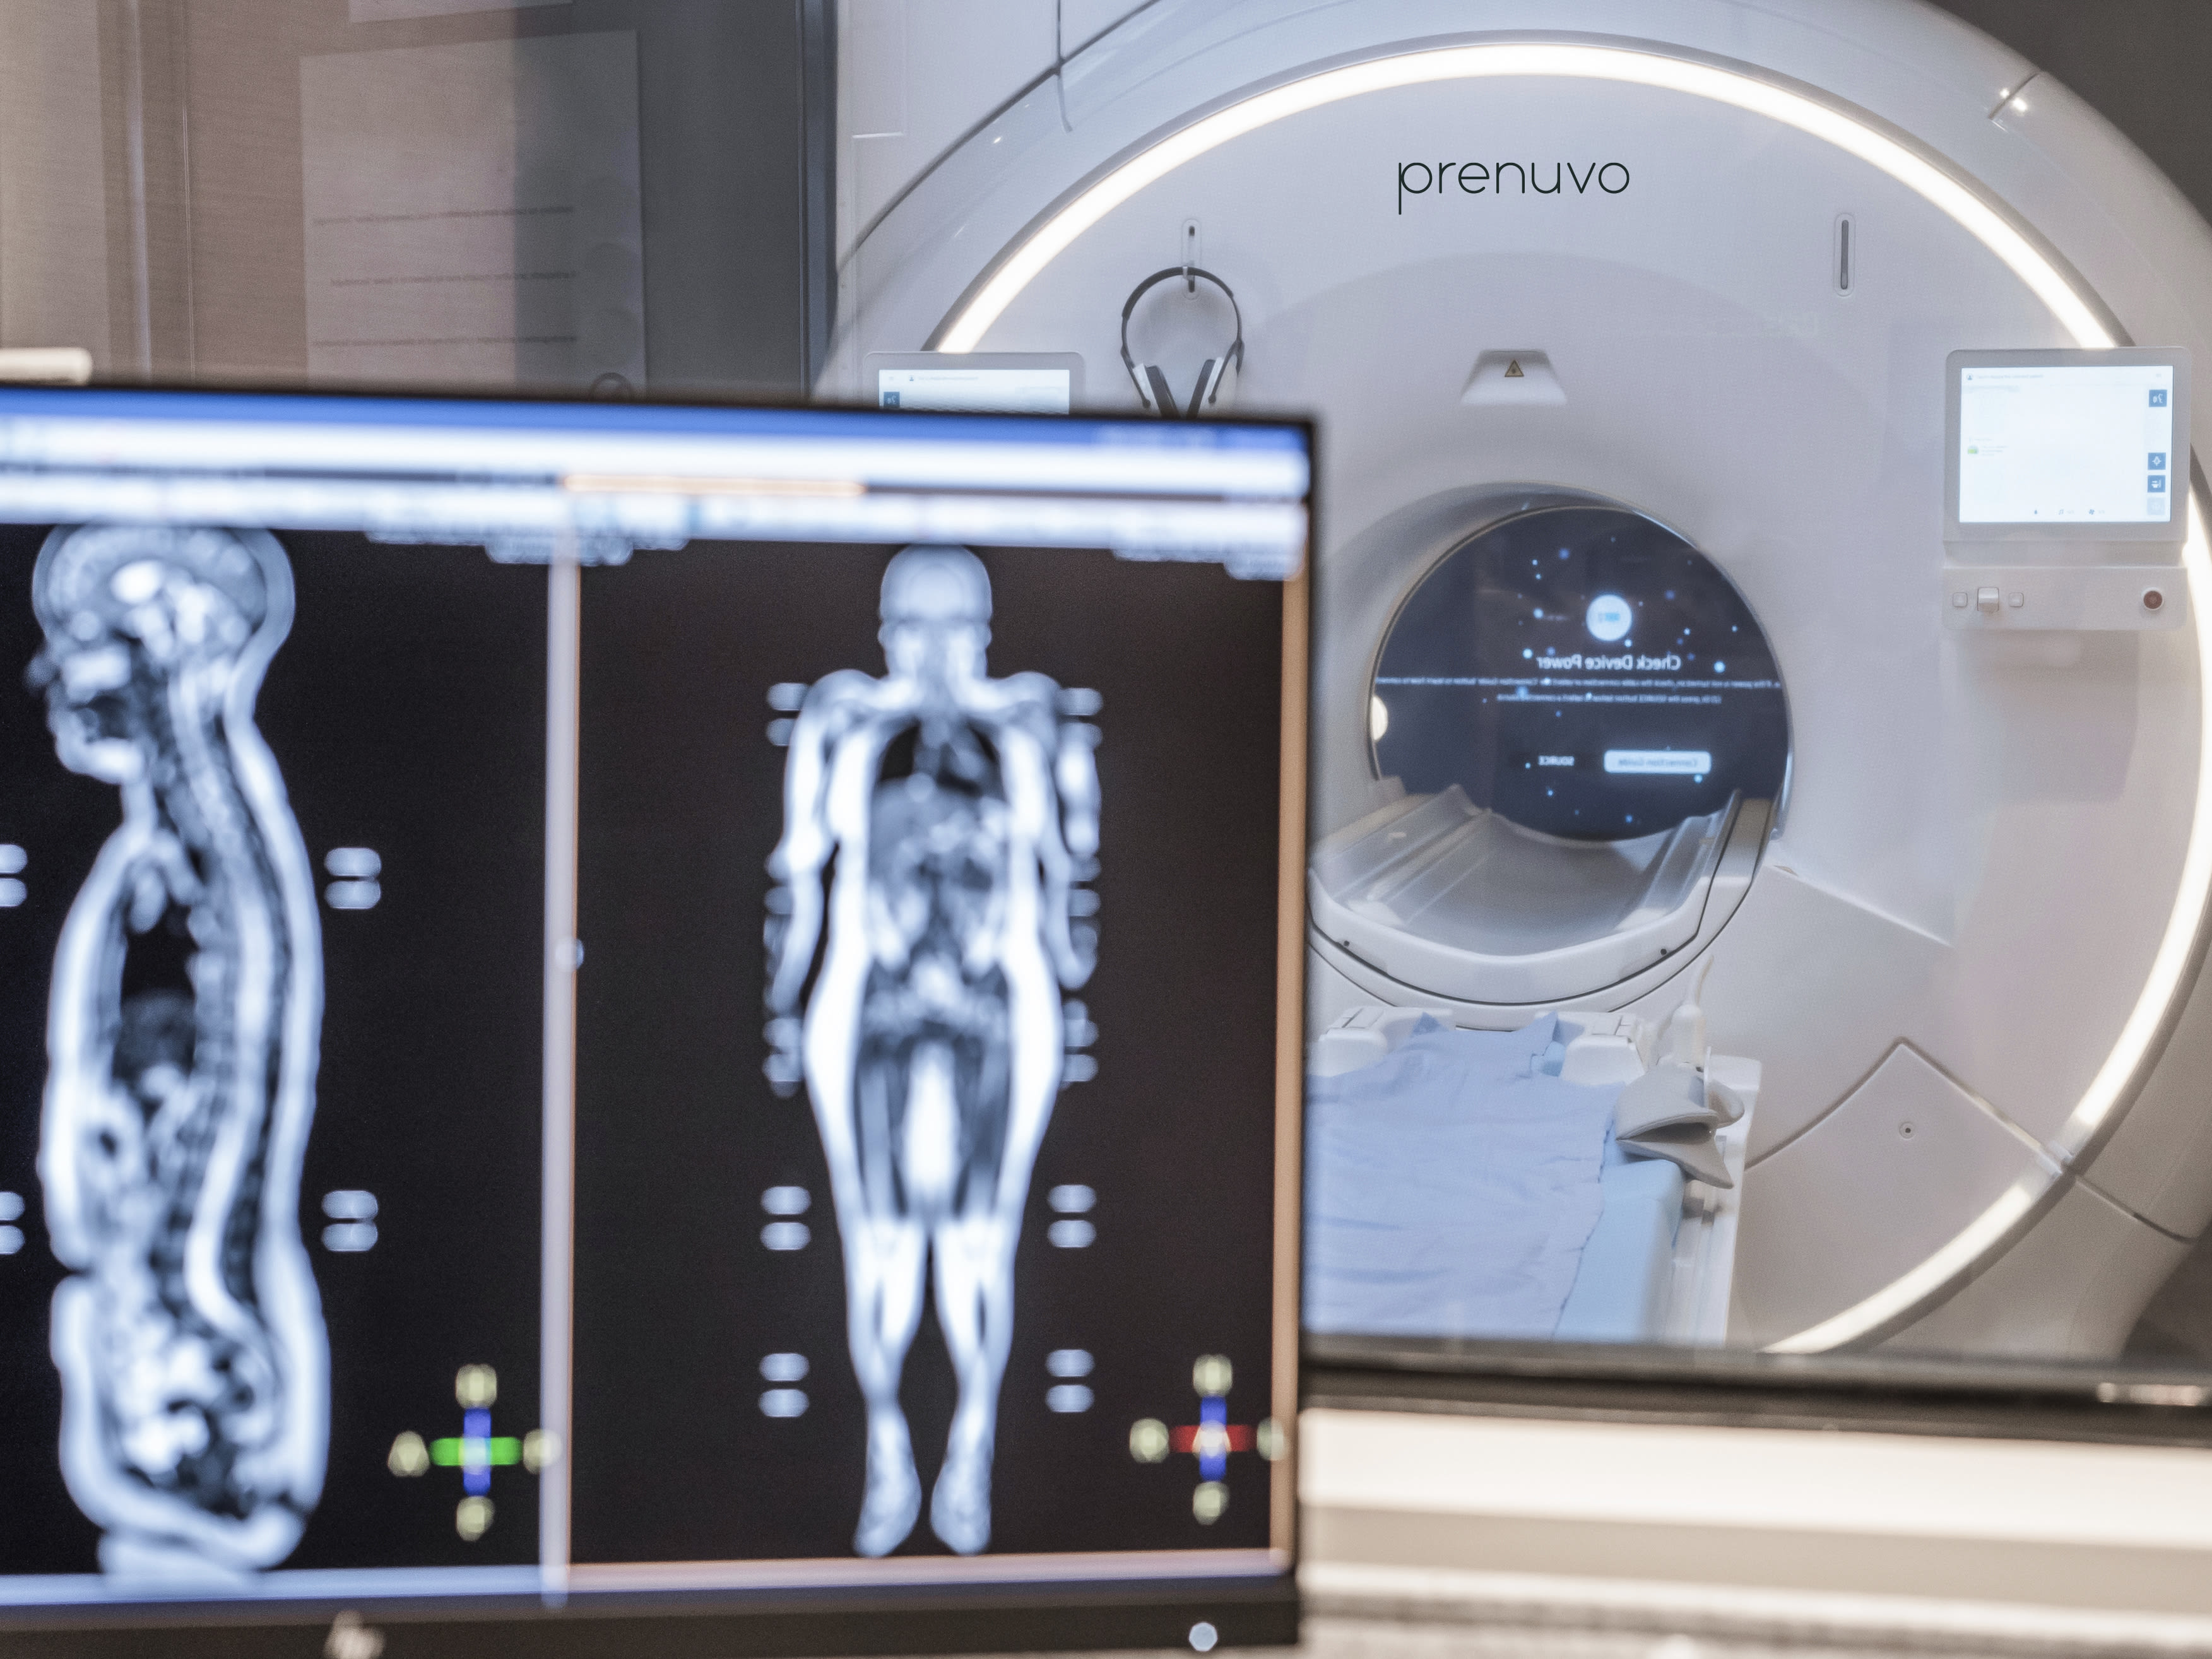 Celebrities are getting $2,000 MRI scans to learn about their health. Should you?